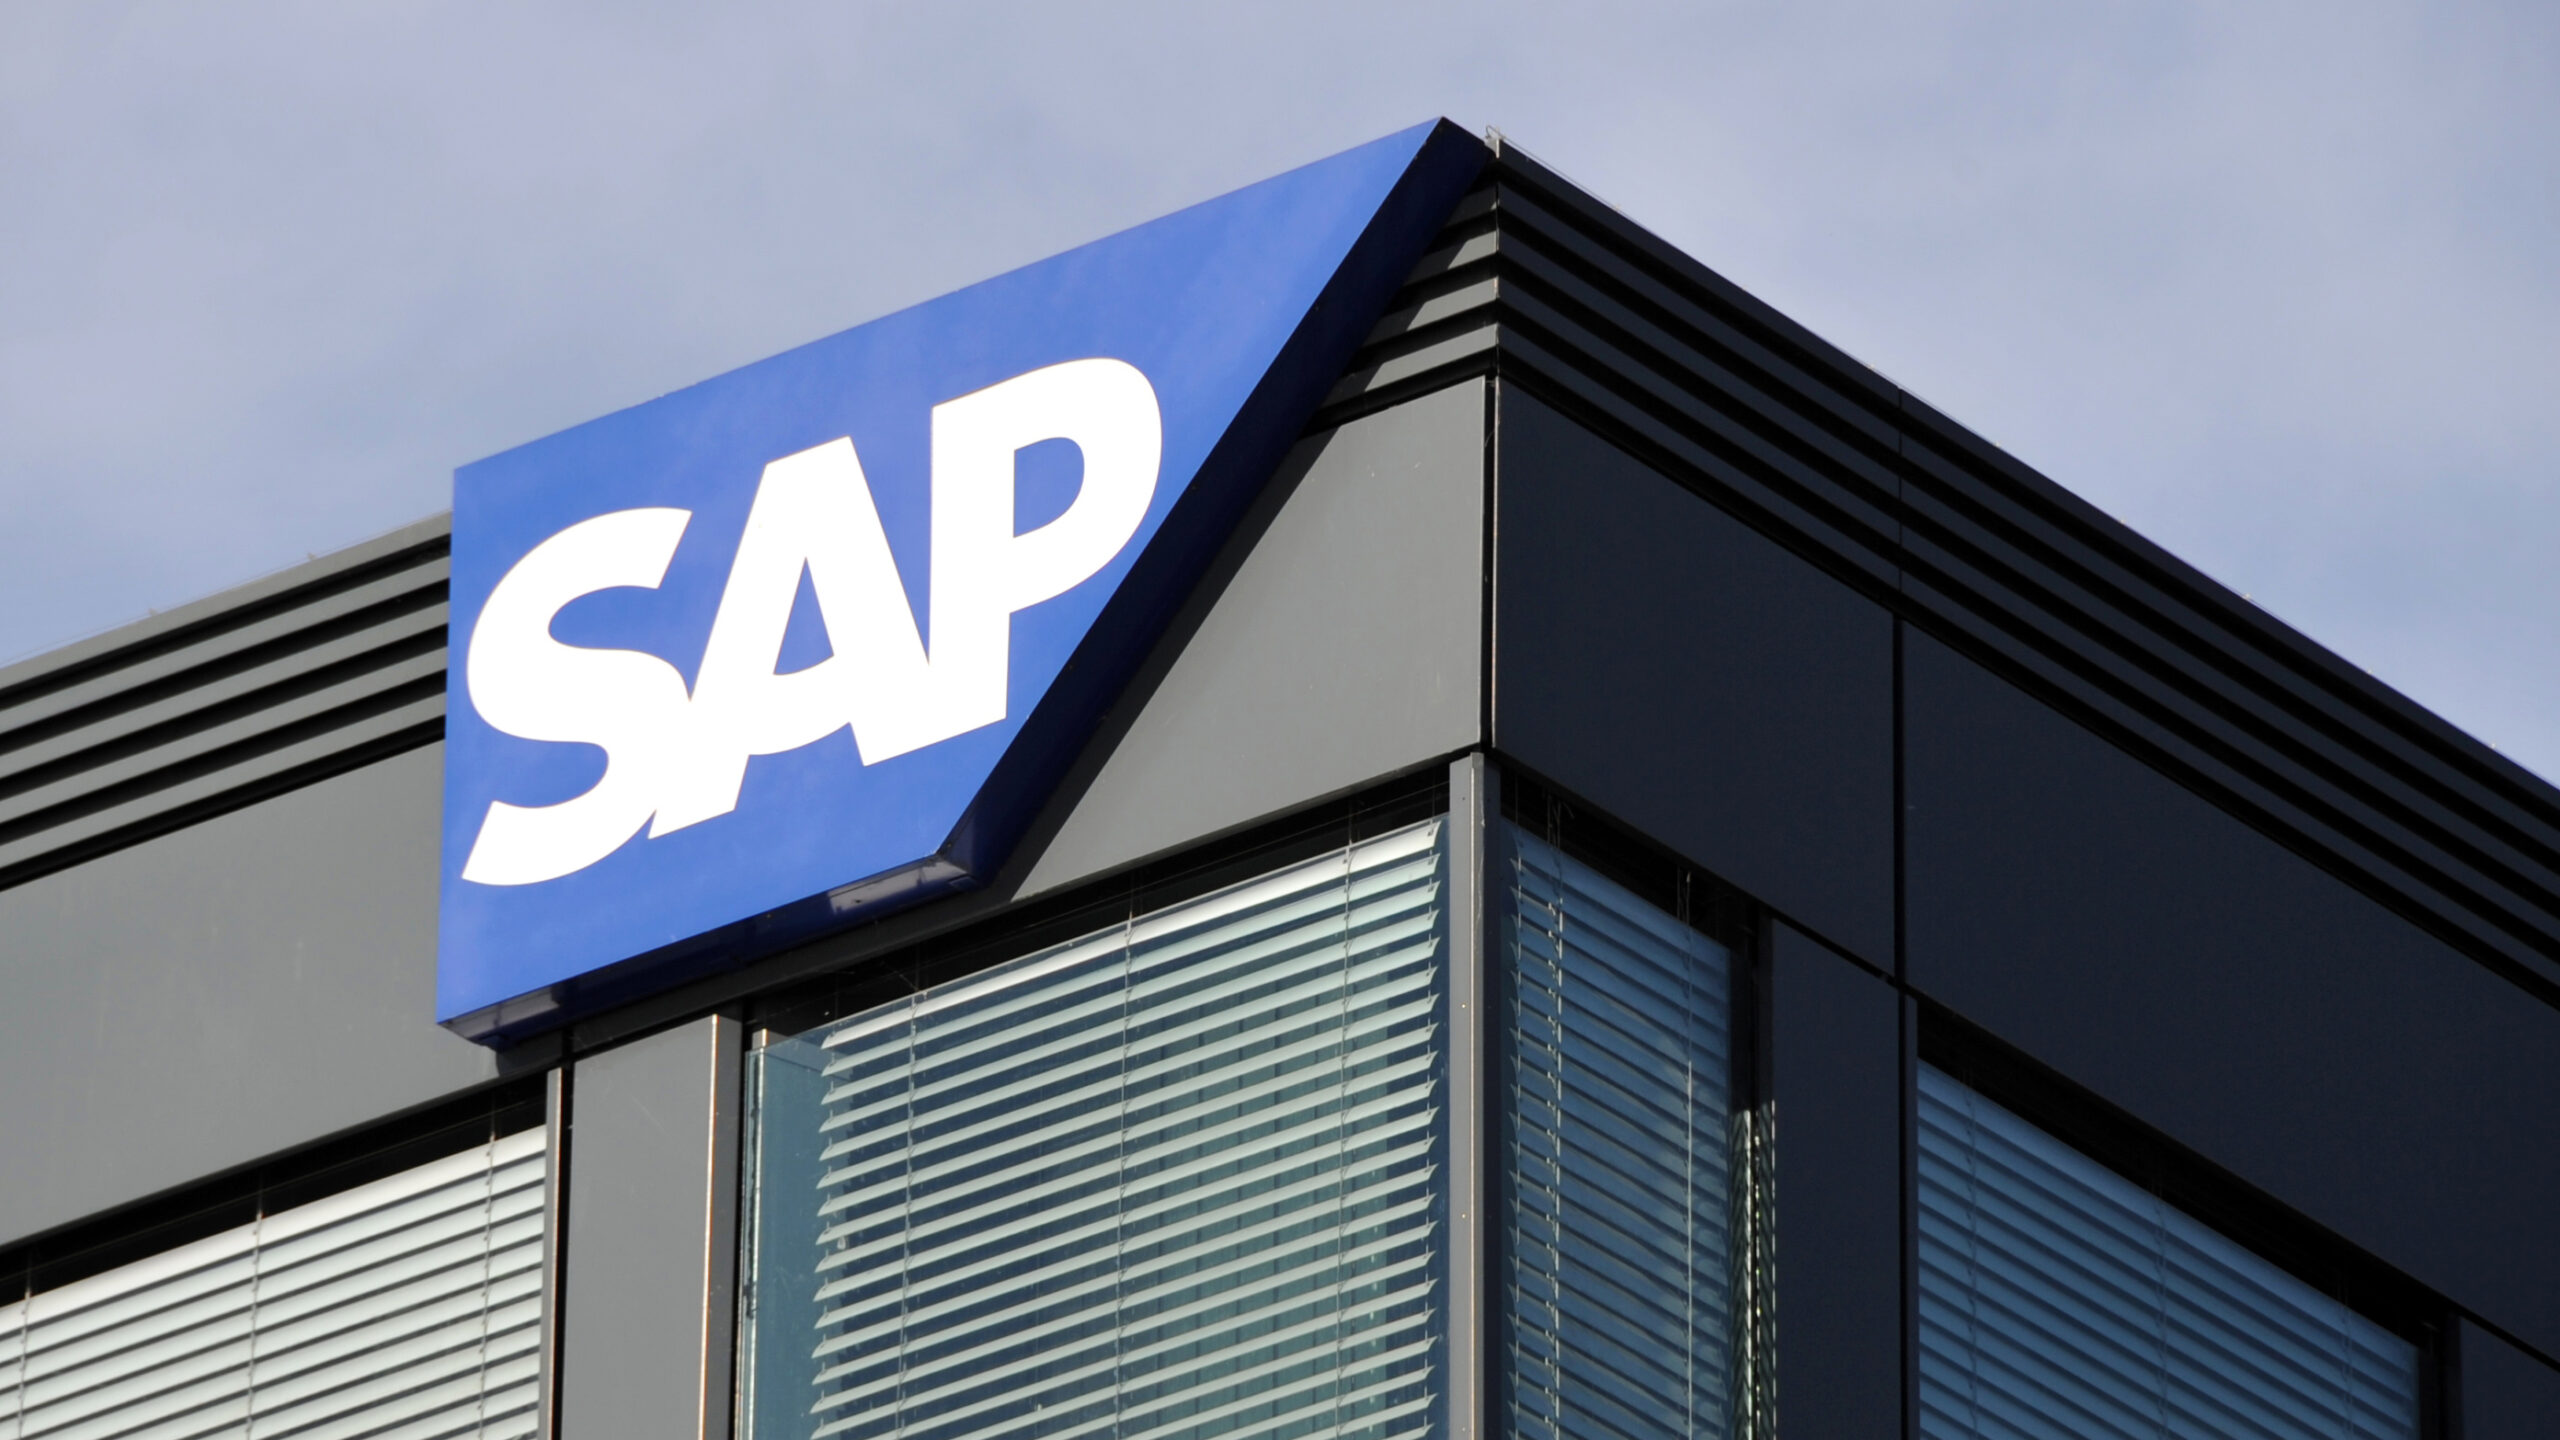 SAP users are at high risk as hackers exploit application vulnerabilities